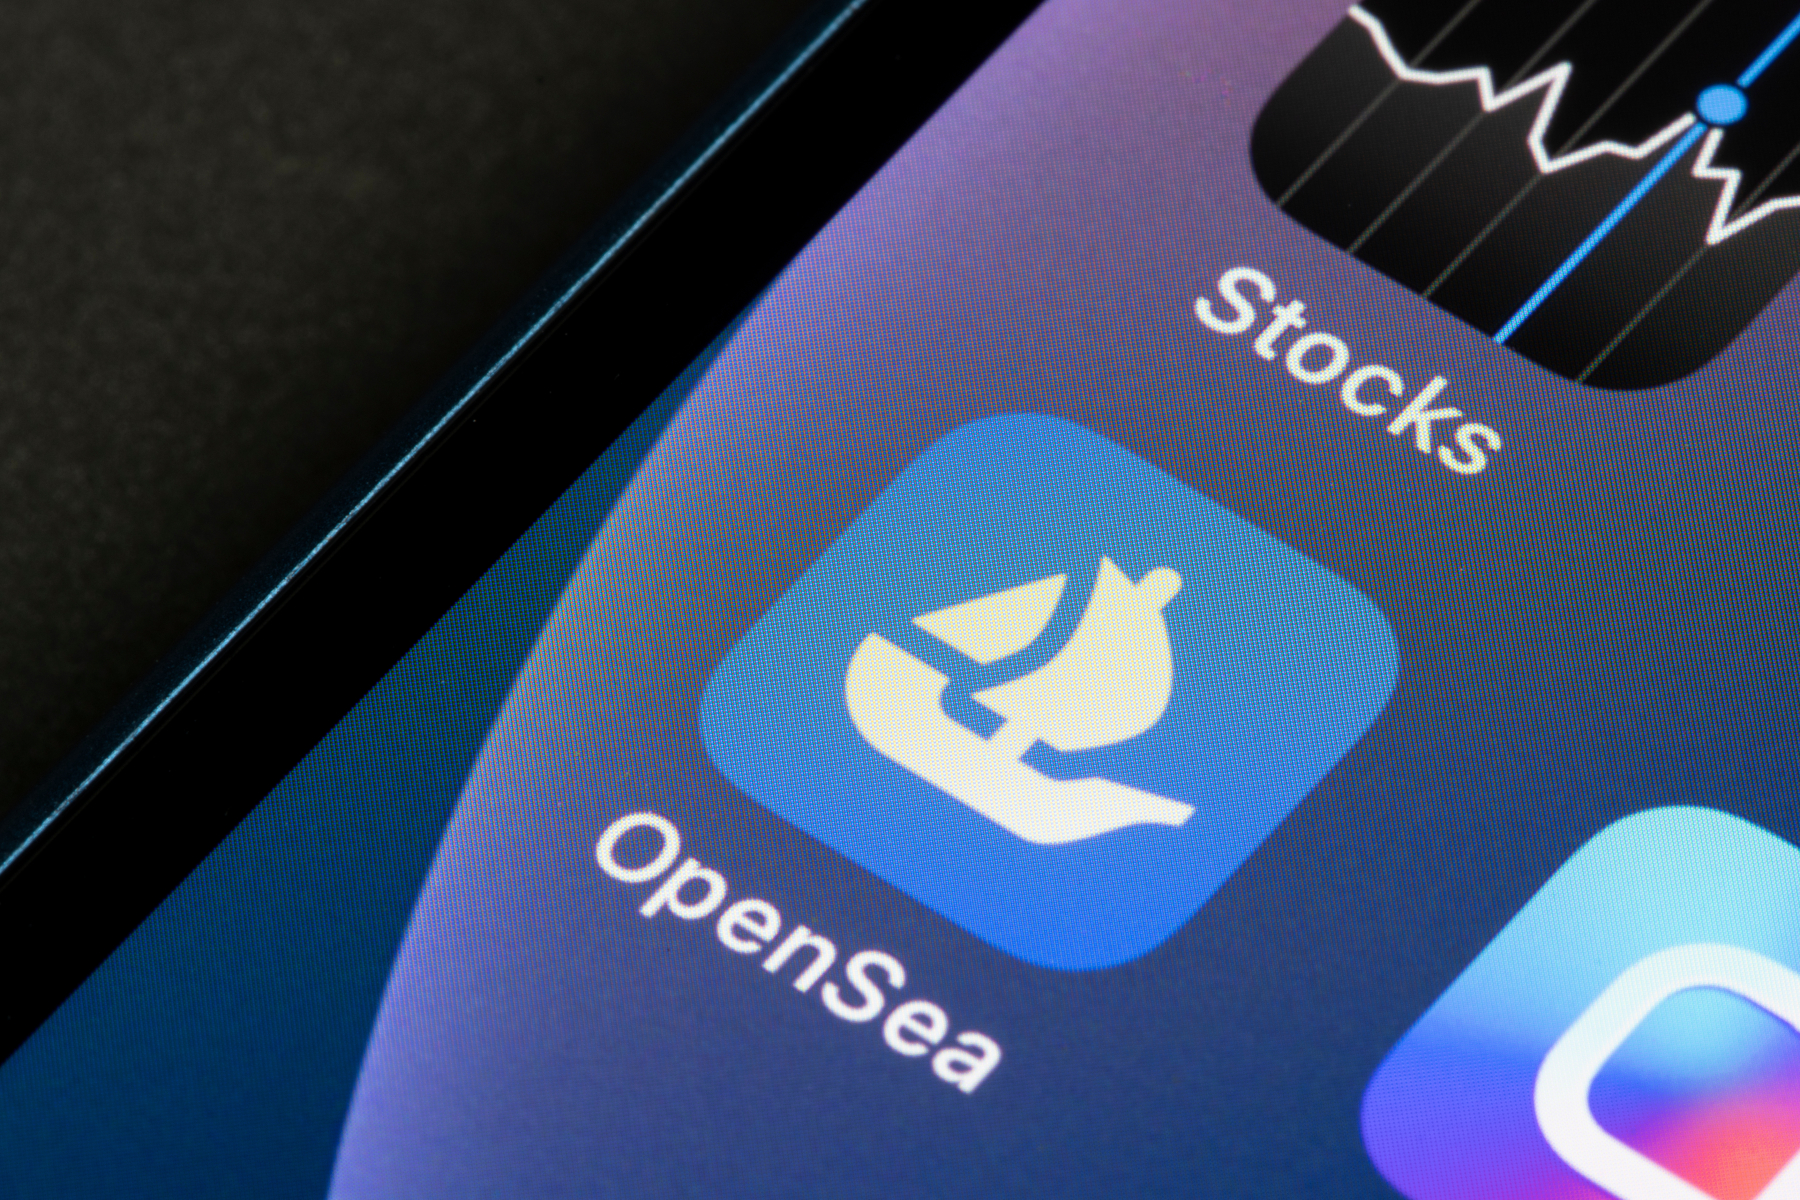 OpenSea CEO: “FTX collapse is an opportunity to put the focus back on trust”
